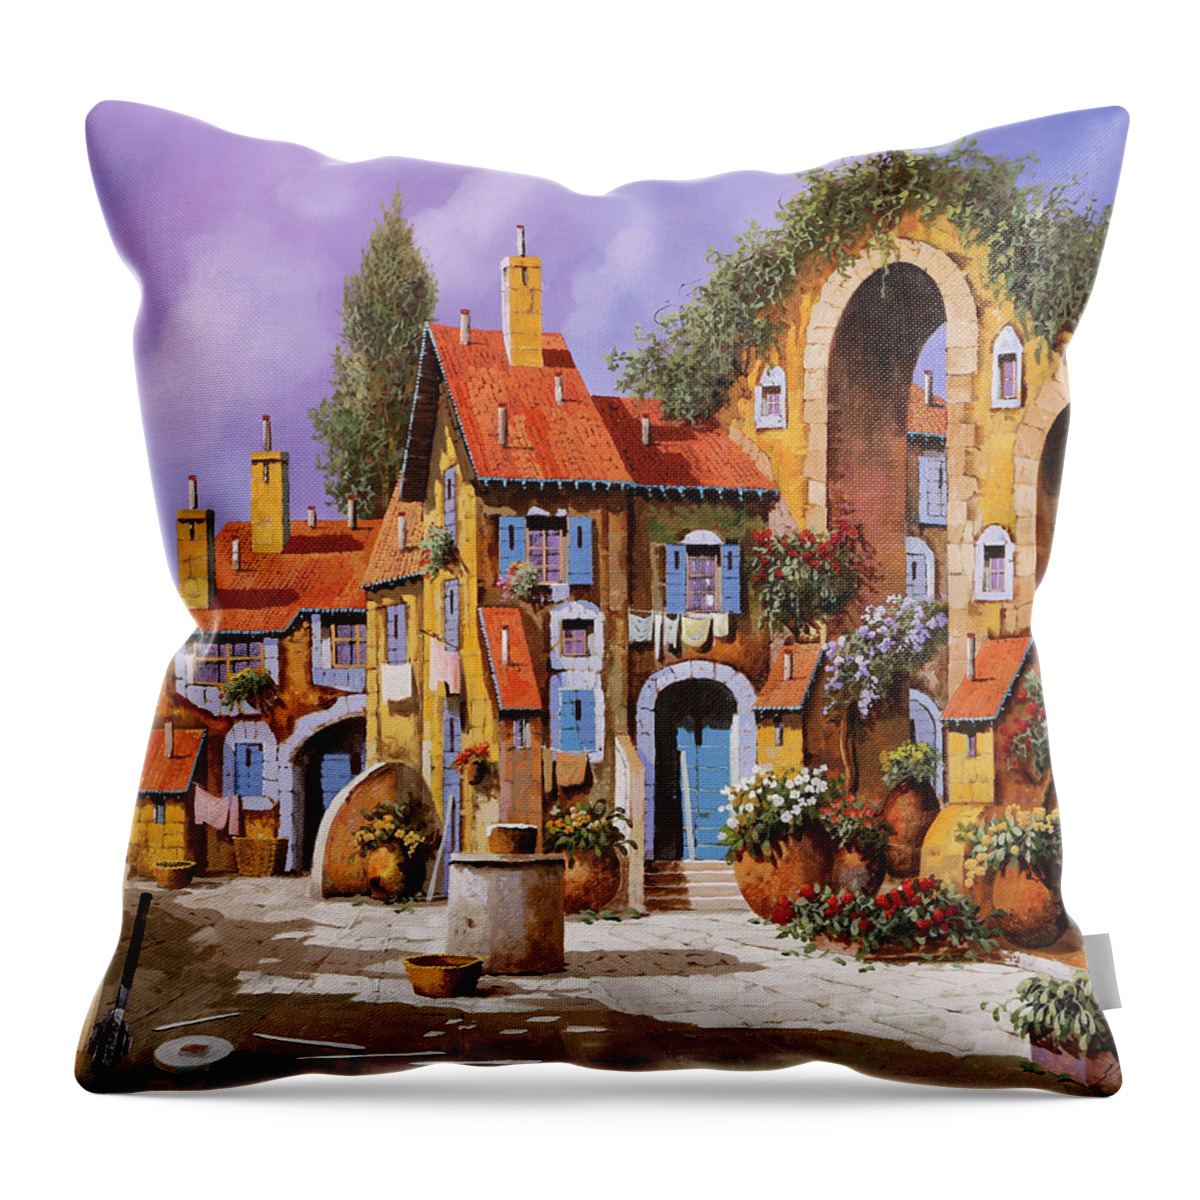 Village Throw Pillow featuring the painting Borgo A Colori by Guido Borelli